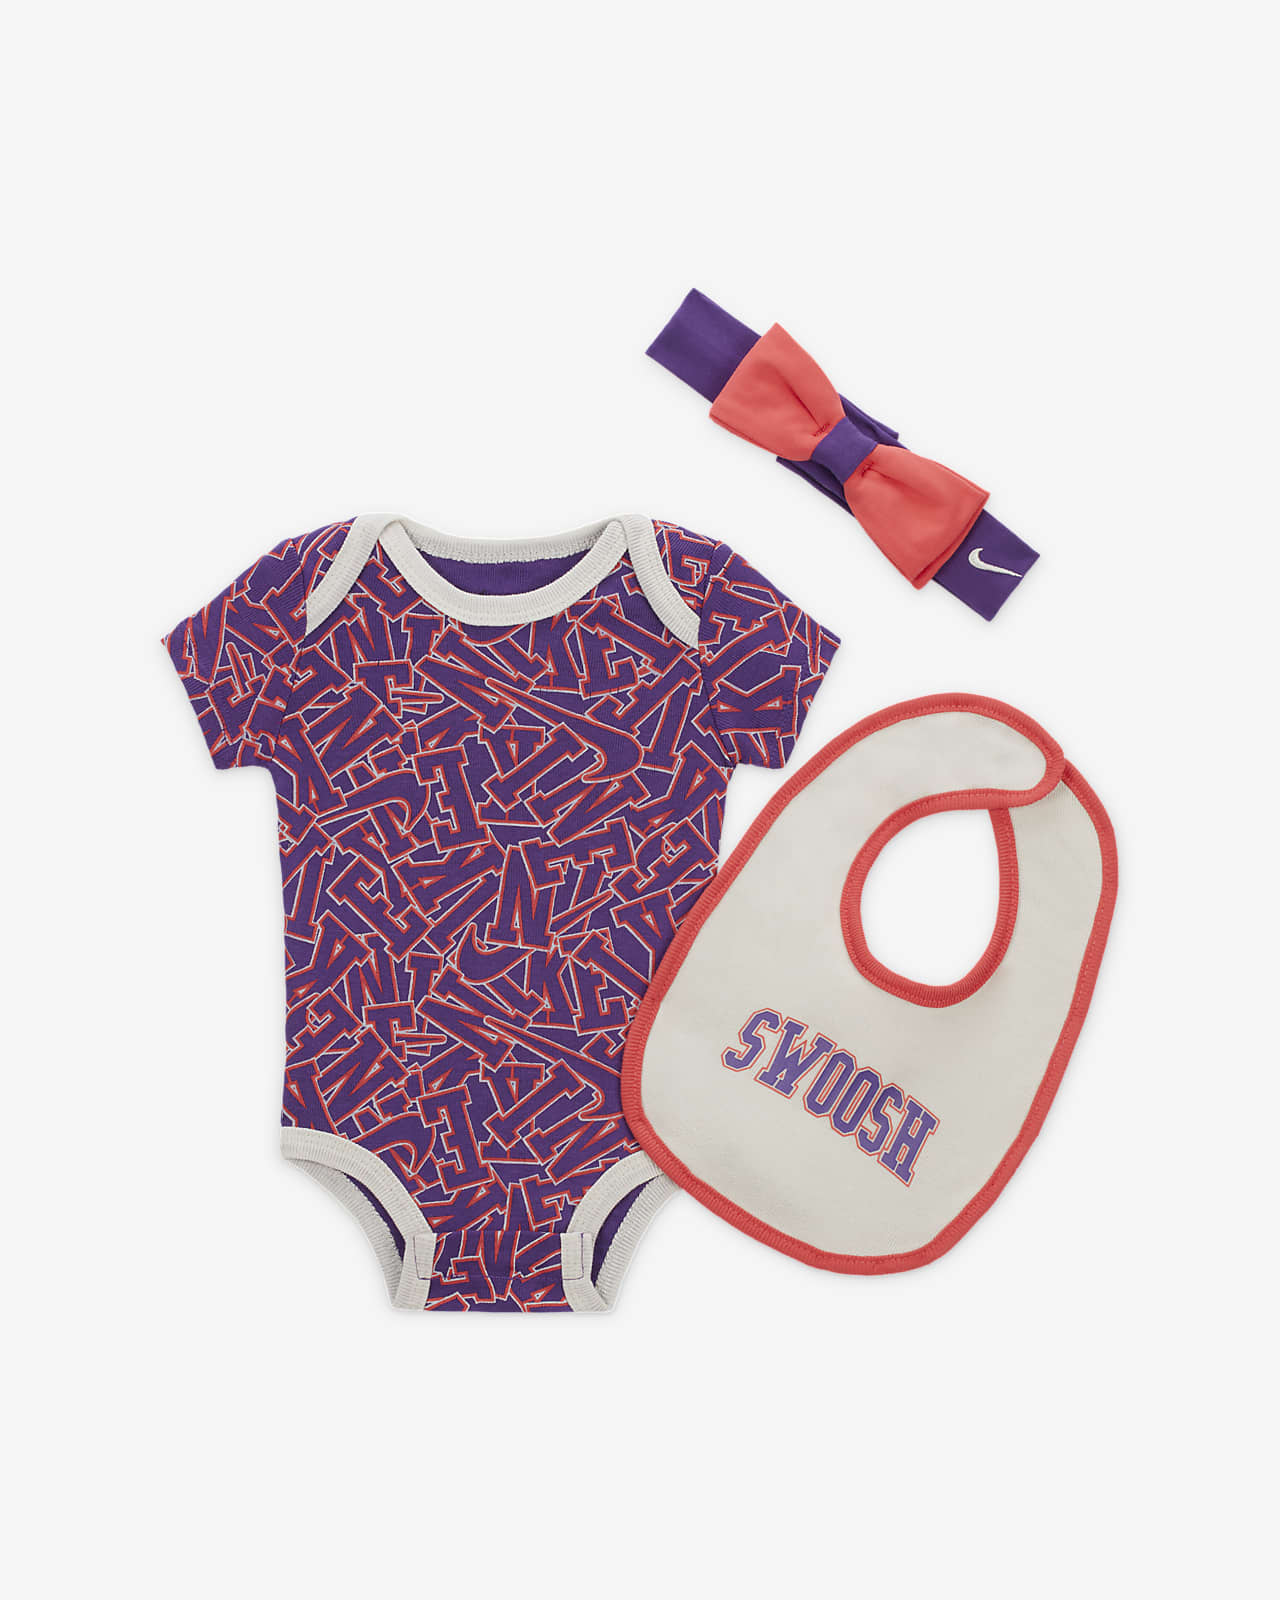 Nike Join the Club 3-Piece Boxed Set Baby 3-Piece Bodysuit Set